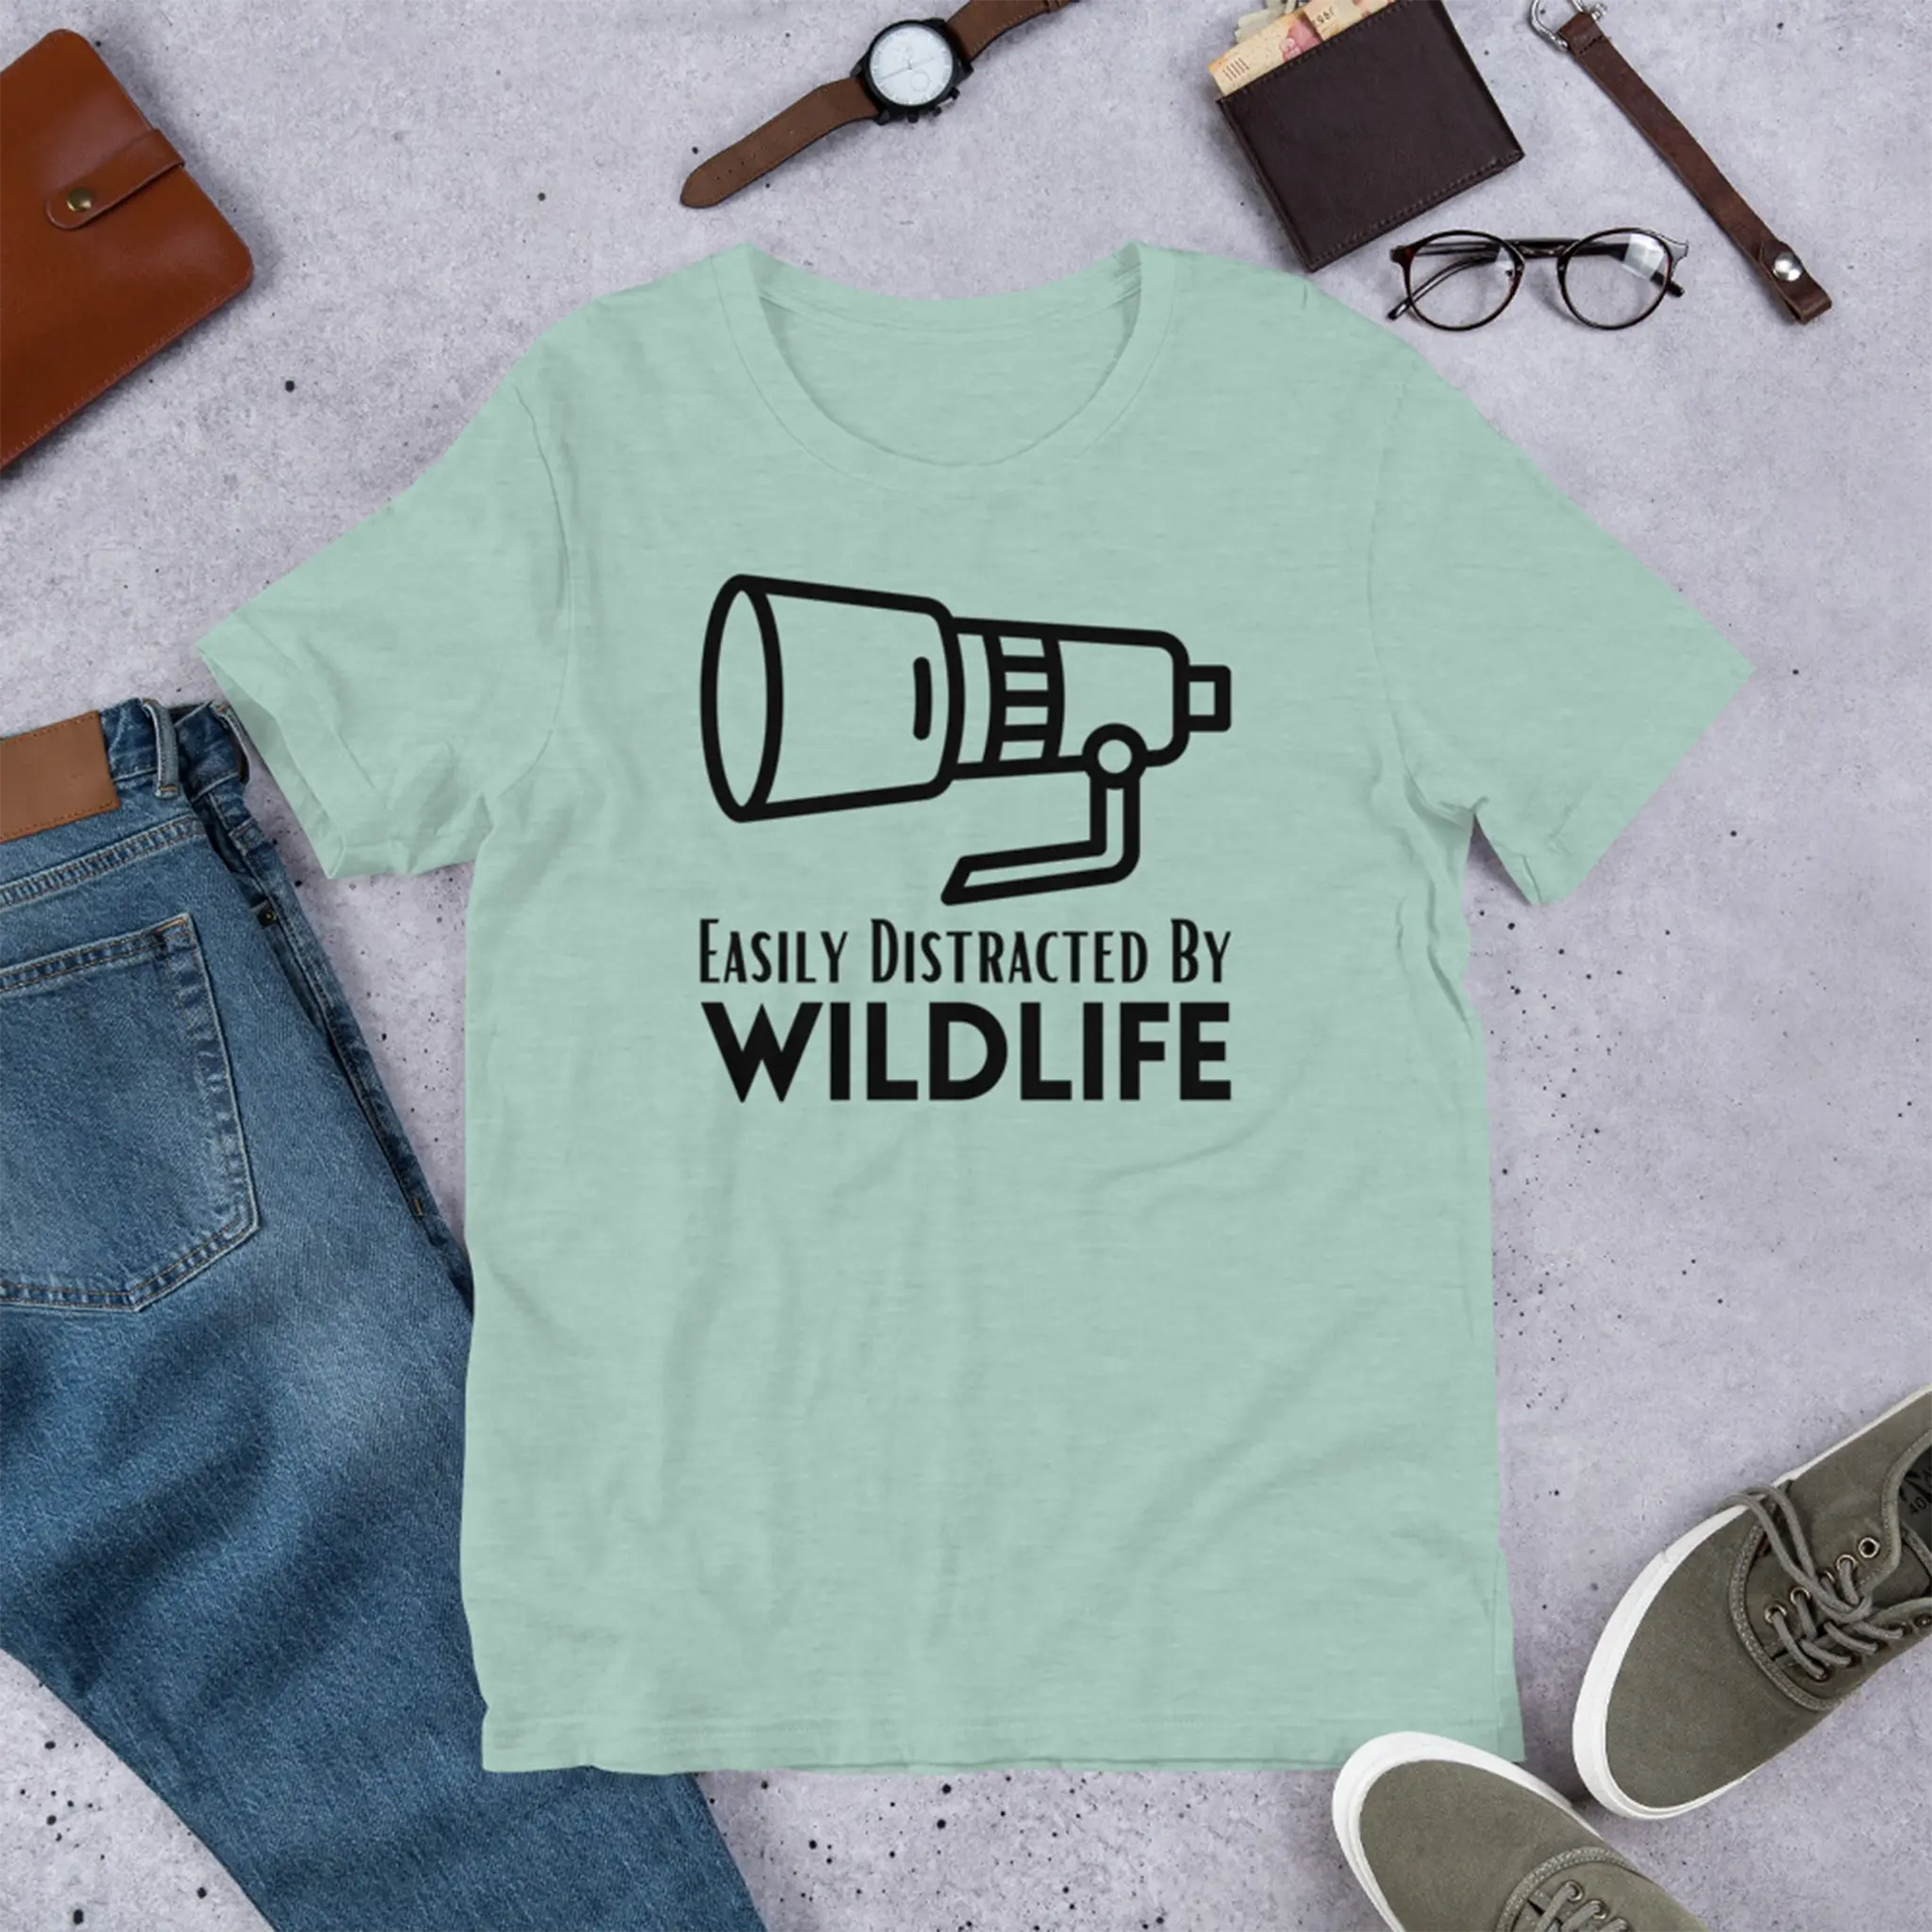 Wildlife Photographer T-Shirt by Sara Turbyfill Photography and Design.